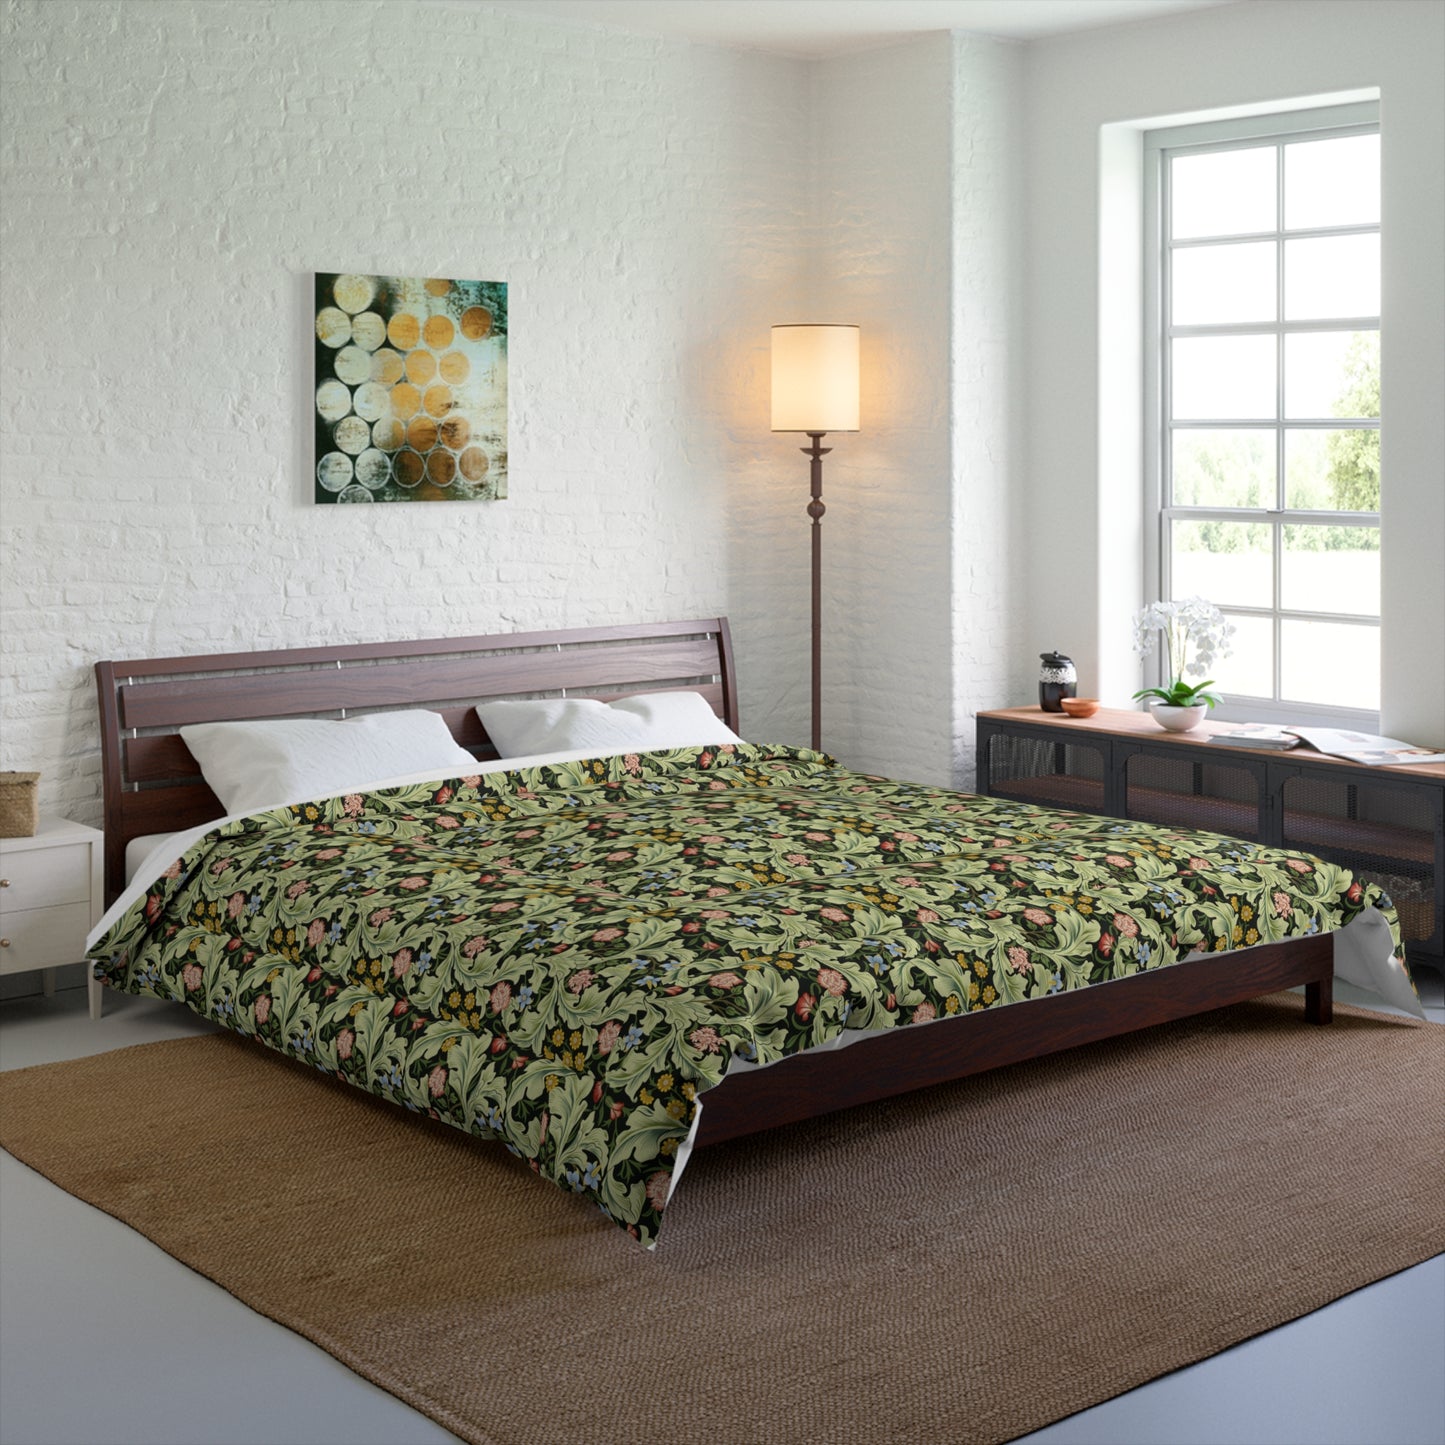 william-morris-co-comforter-leicester-collection-green-5